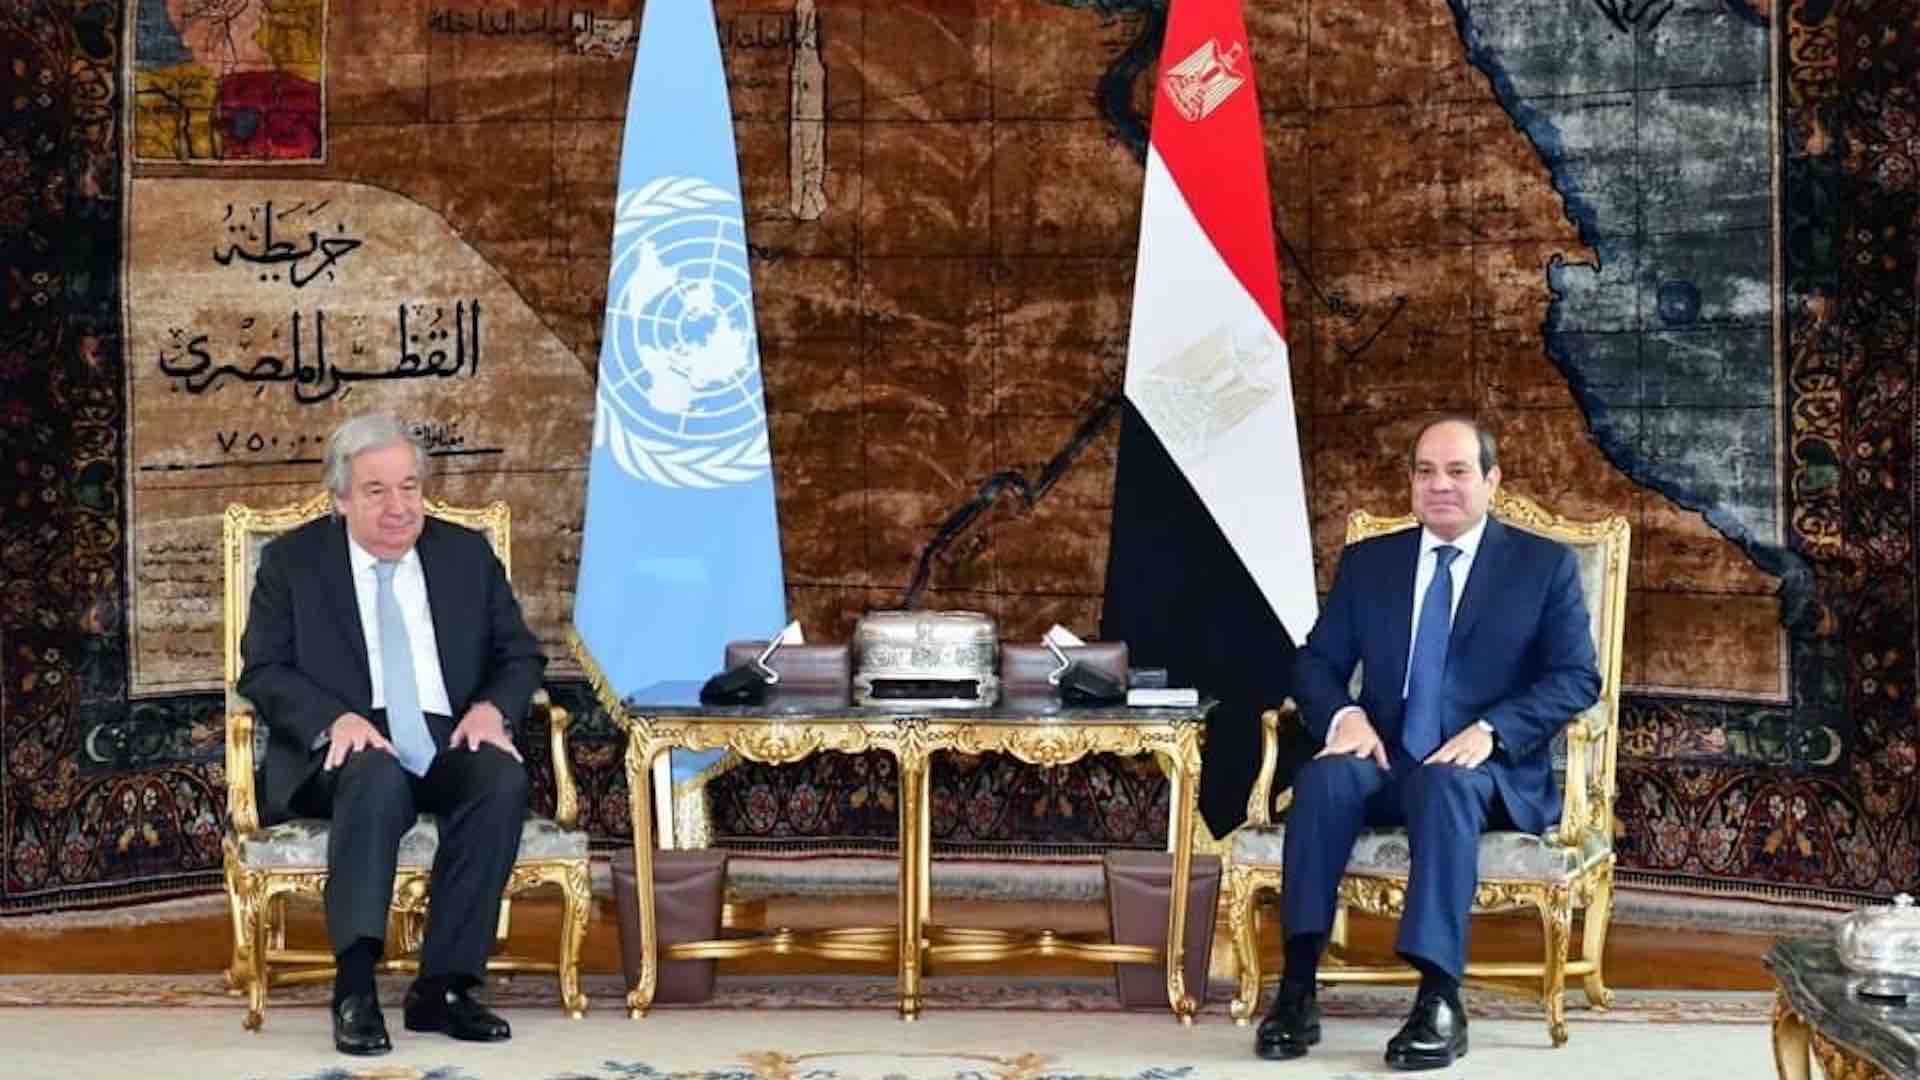 Egyptian President Abdel Fattah El-Sisi and UN Secretary-General Antonio Guterres engaged in a crucial discussion concerning significant regional and international developments, with a notable emphasis on recent events unfolding in the Gaza Strip. The meeting, held in Cairo, delved into pressing matters concerning the ongoing crisis. President Sisi underscored the responsibility of the UN Security Council in addressing the escalating situation, expressing deep concern over the withdrawal of support for the UN Relief and Works Agency for Palestine Refugees (UNRWA) by certain nations. He characterized such actions as tantamount to "collective punishment of innocent Palestinians," urging for a collective effort to alleviate their plight. In outlining strategies for immediate action, President Sisi highlighted the urgent need for a ceasefire, facilitated exchanges of detainees, and the prompt delivery of humanitarian aid to alleviate the suffering of the people in Gaza. He emphasized the importance of coordinating with relevant UN agencies to ensure effective distribution of aid via land routes, while also considering the feasibility of air drops, especially in the northern regions of Gaza where access is severely restricted. Both leaders acknowledged the severity of the situation and stressed the critical importance of preventing further escalation. They firmly rejected attempts at displacing Palestinians and warned against military operations in Palestinian Rafah, citing potential catastrophic consequences on the dire humanitarian crisis. The meeting between President Sisi and Secretary-General Guterres underscores the urgent need for international cooperation to address the Gaza Strip crisis. With lives at stake and humanitarian conditions deteriorating, swift and decisive action from the international community is imperative to alleviate Palestinian suffering and work towards a sustainable solution to the conflict.